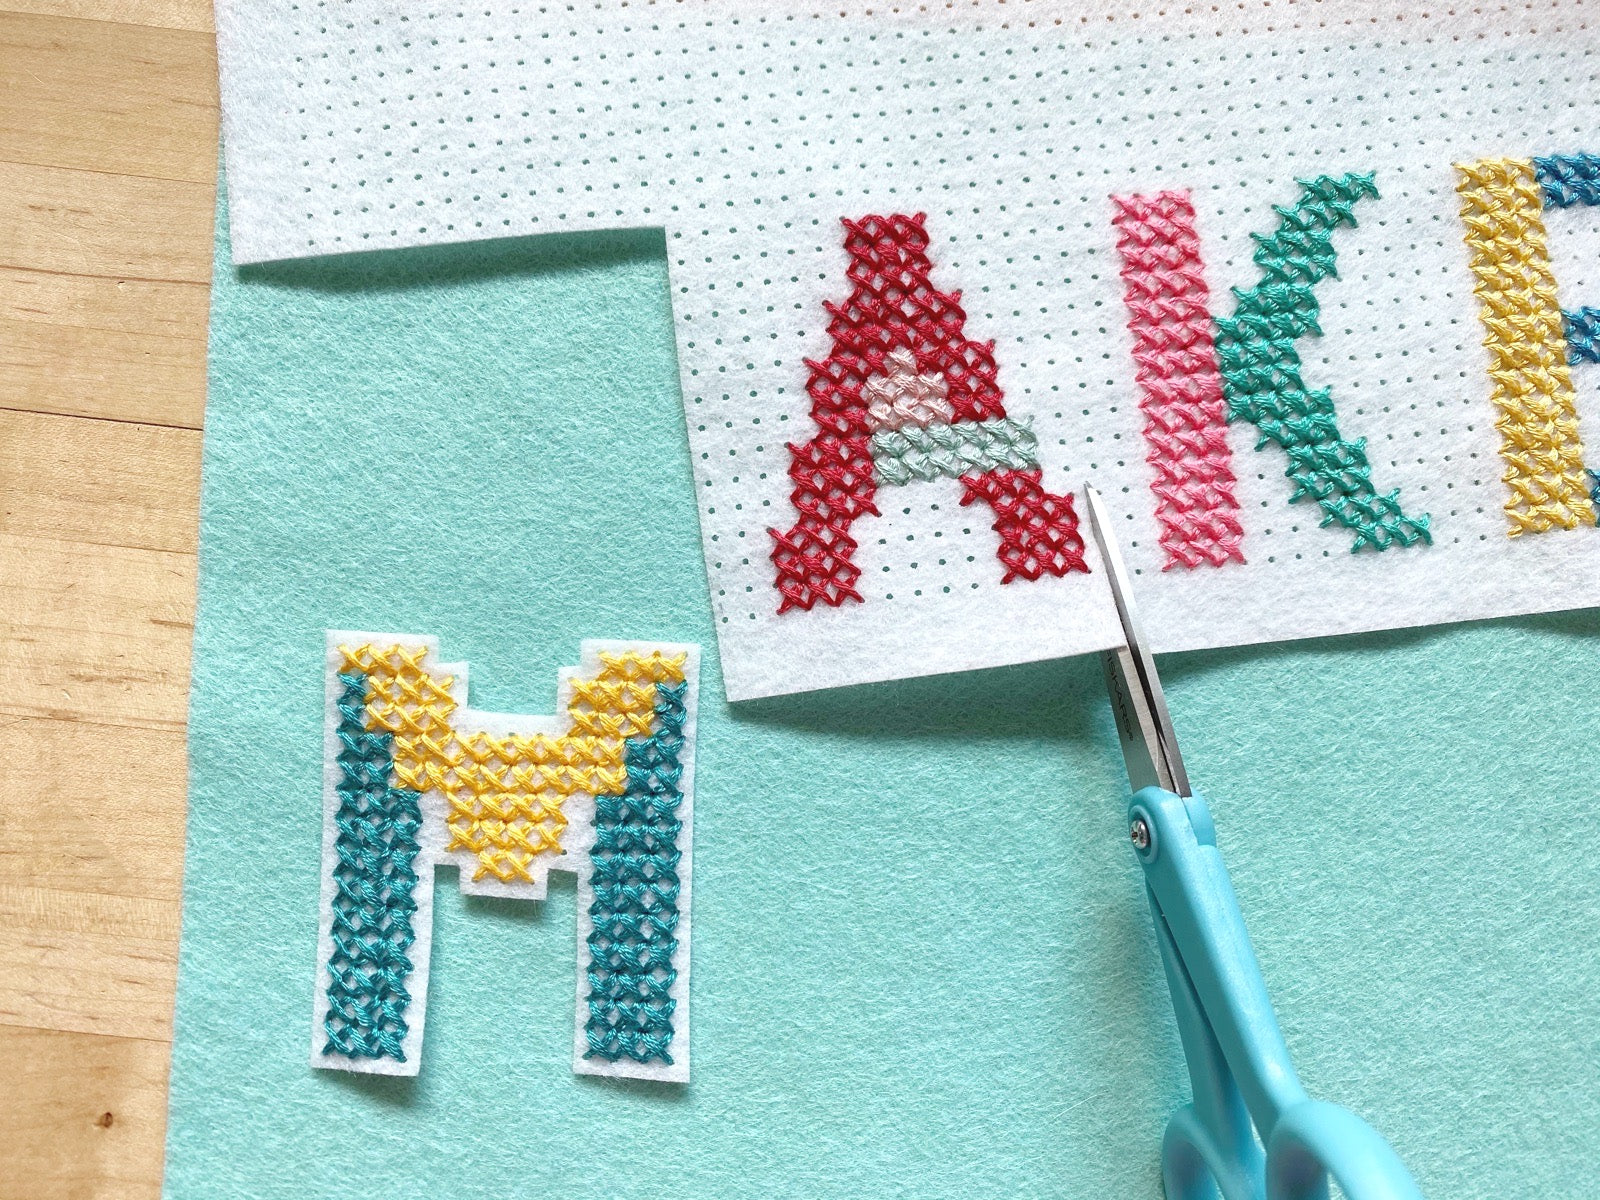 Felt letters to stitch